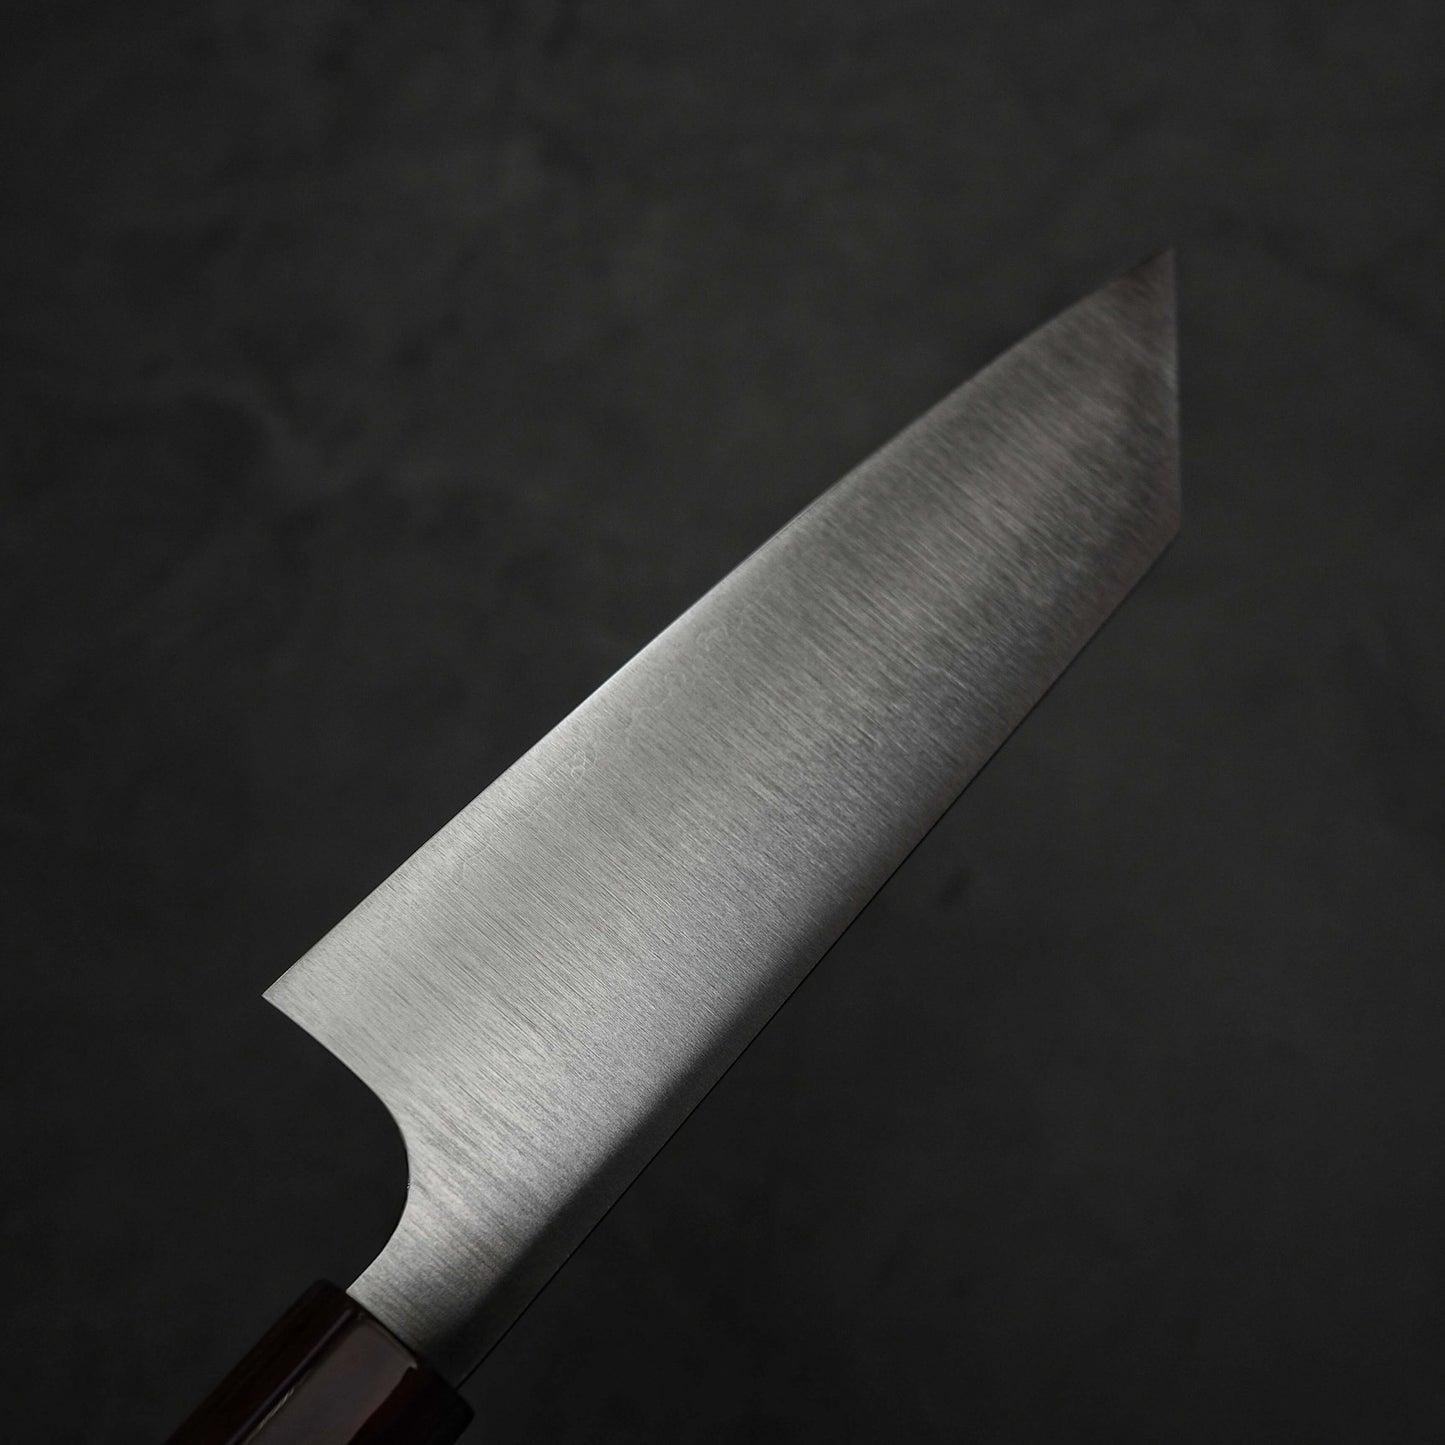 Top view of Kei Kobayashi SG2 bunka where it only shows the left side of the blade